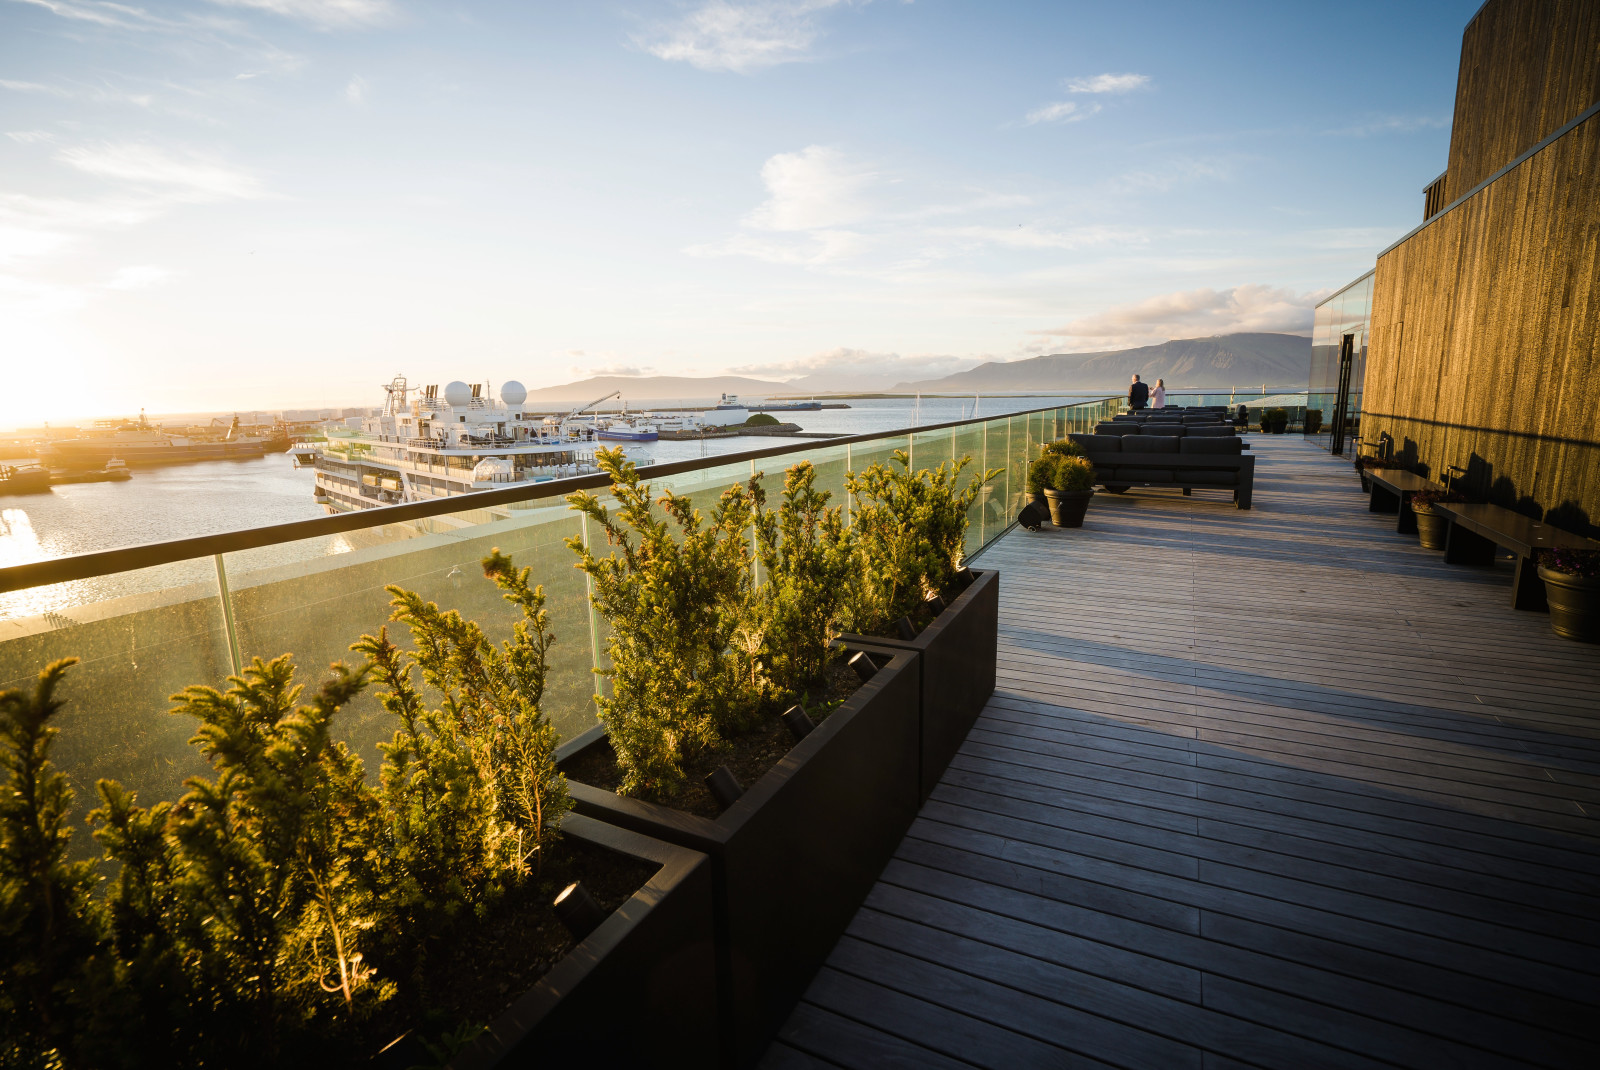 Rooftop with garden boxes overlooking city during daytime